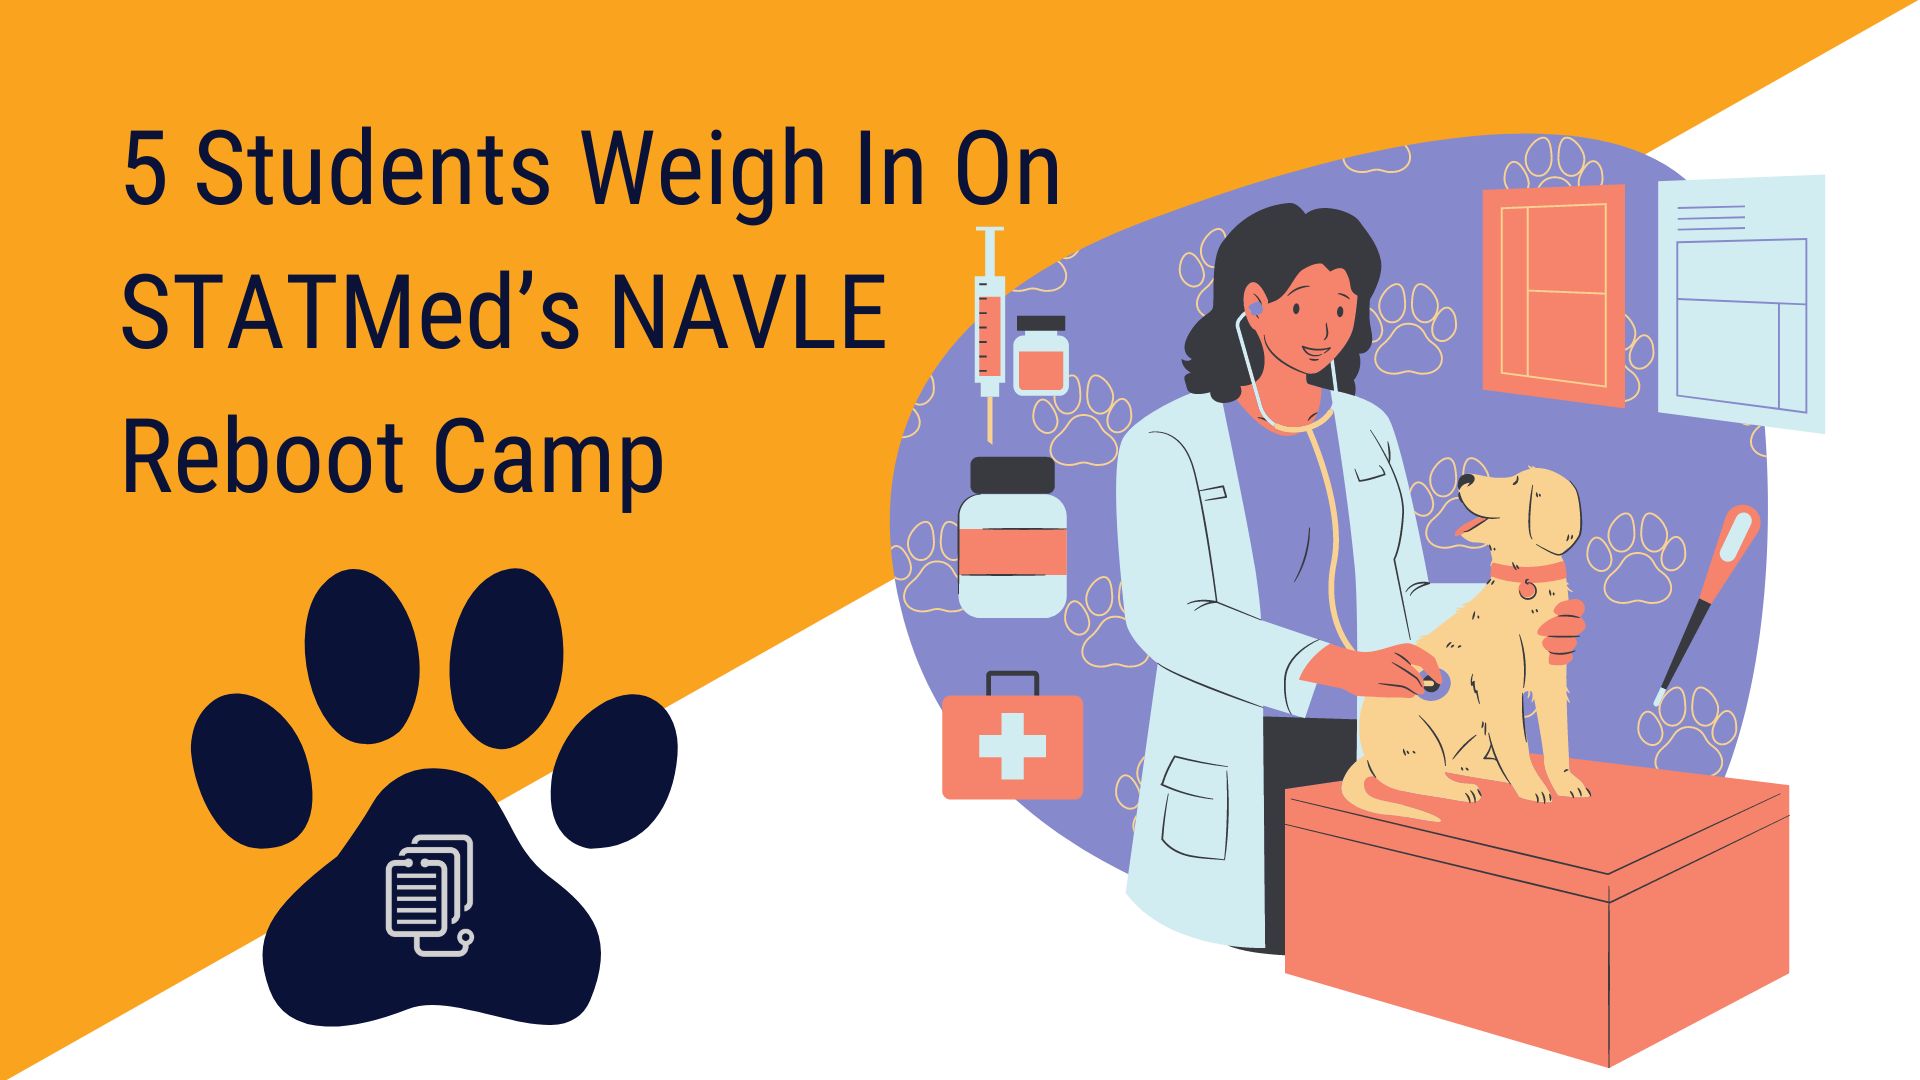 Featured image for “5 students weigh in on STATMed’s NAVLE BOOT CAMP”